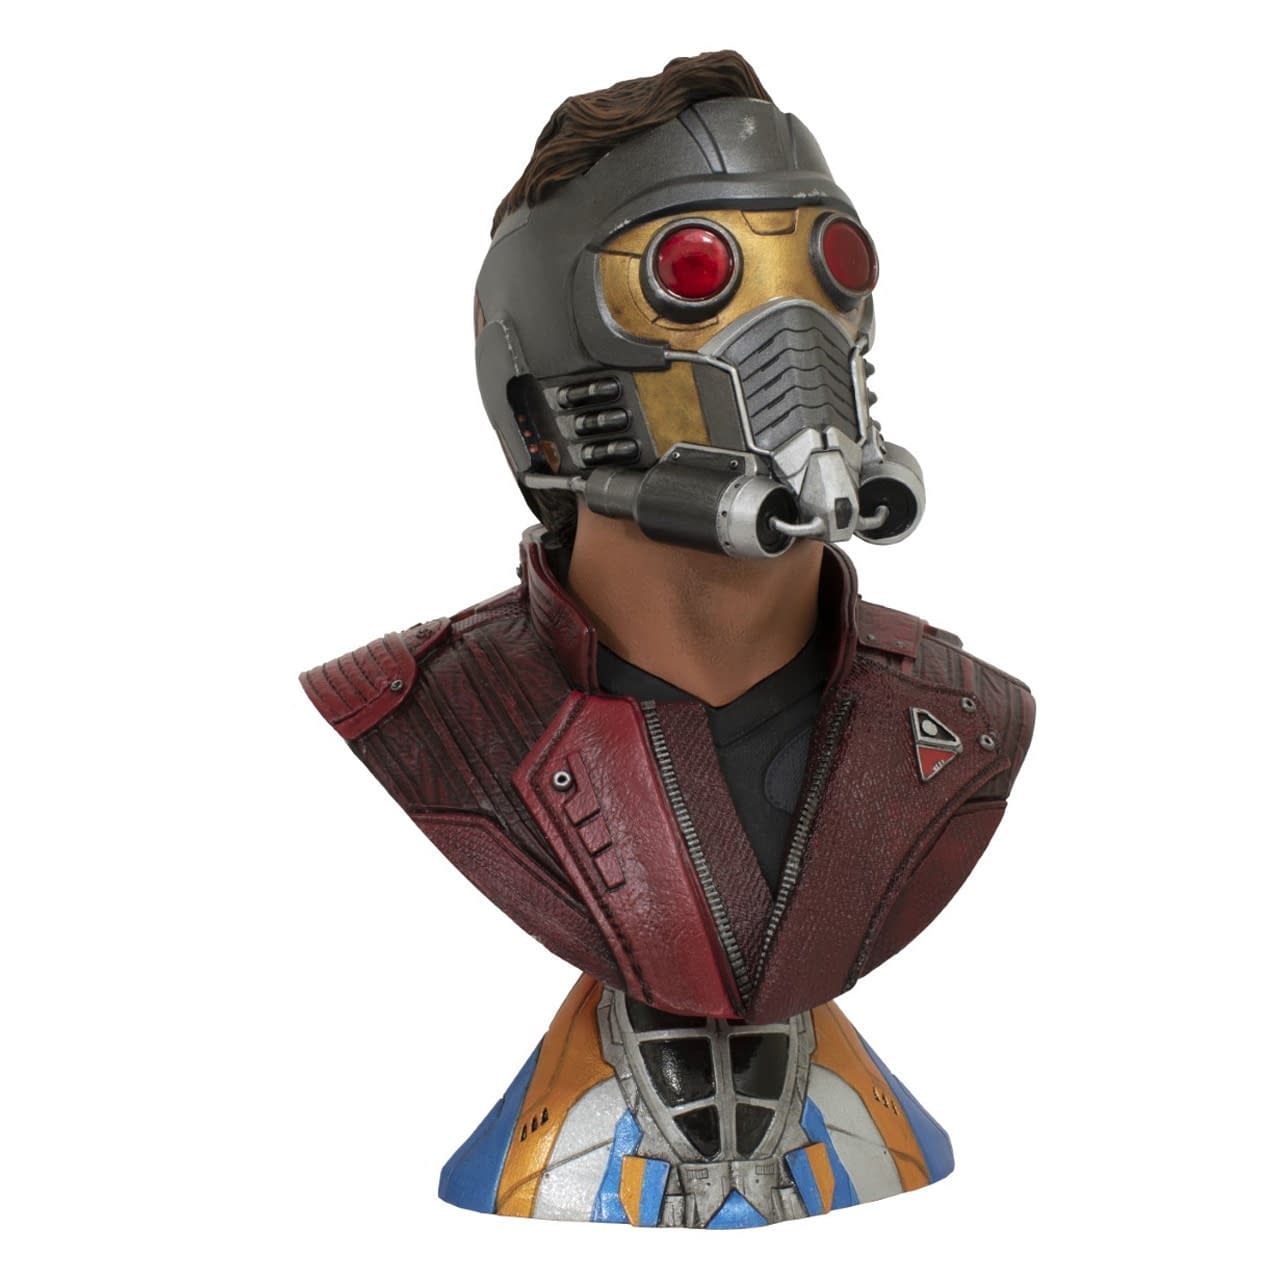 New Marvel Statues Hit Diamond Select with Blade, Gambit, and Star-Lord